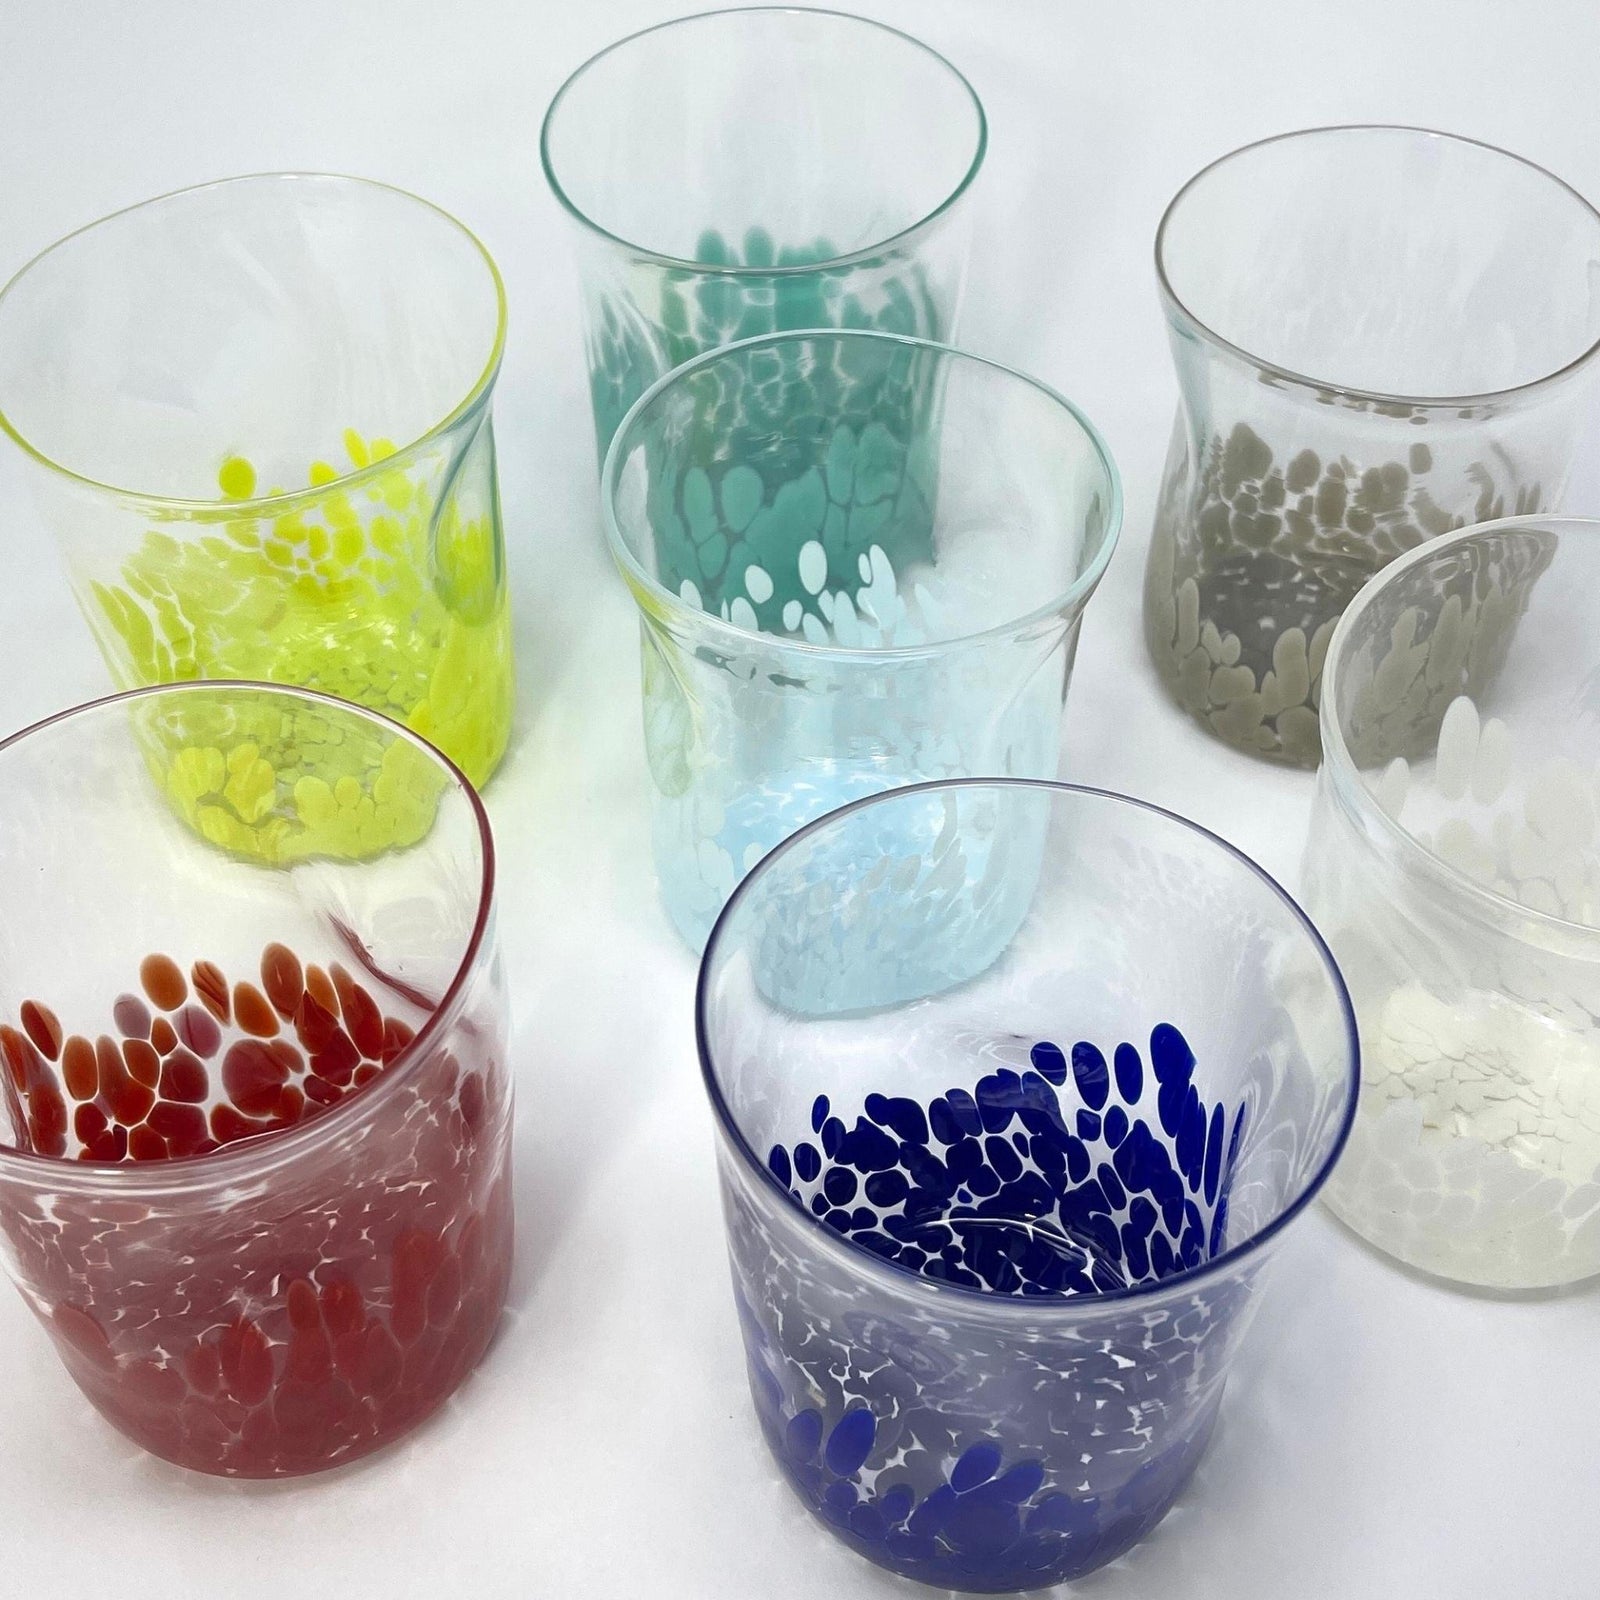 Drinking Glasses Tumblers Murano Sets: Set of 6 Drinking glasses -  Pescheria - Original Murano Glass OMG